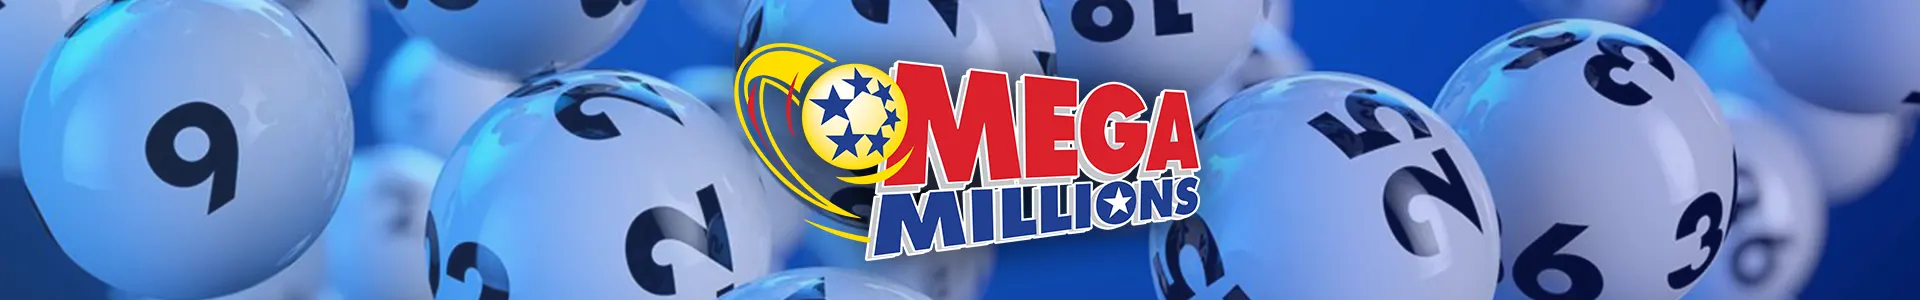 Revealed: The Chance of Winning the Mega Millions Jackpot Compared to Other Extraordinary Events